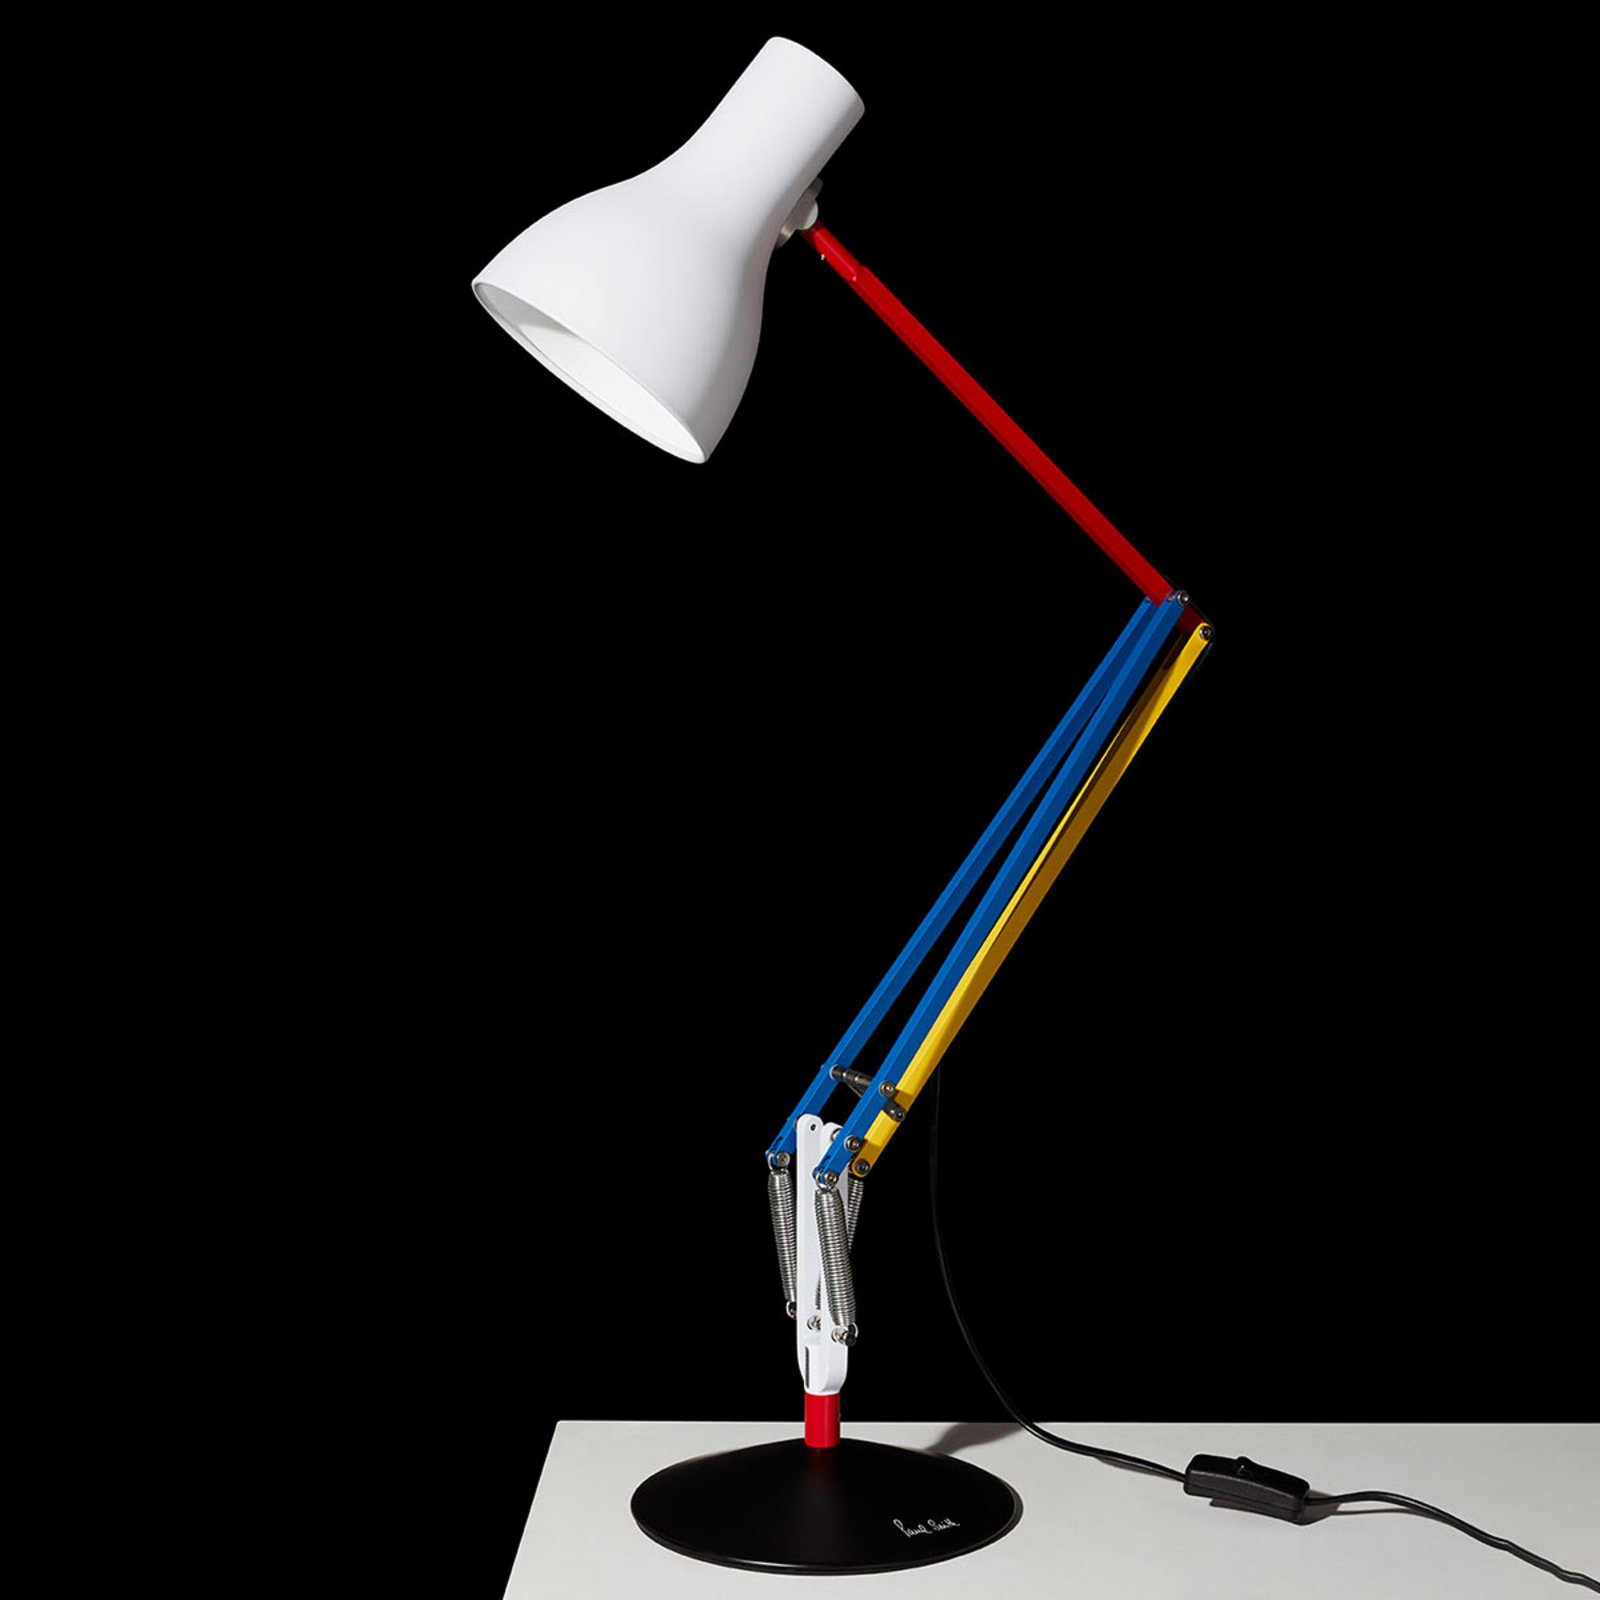 Anglepoise Type 75 Tischlampe Paul Smith Edition 3